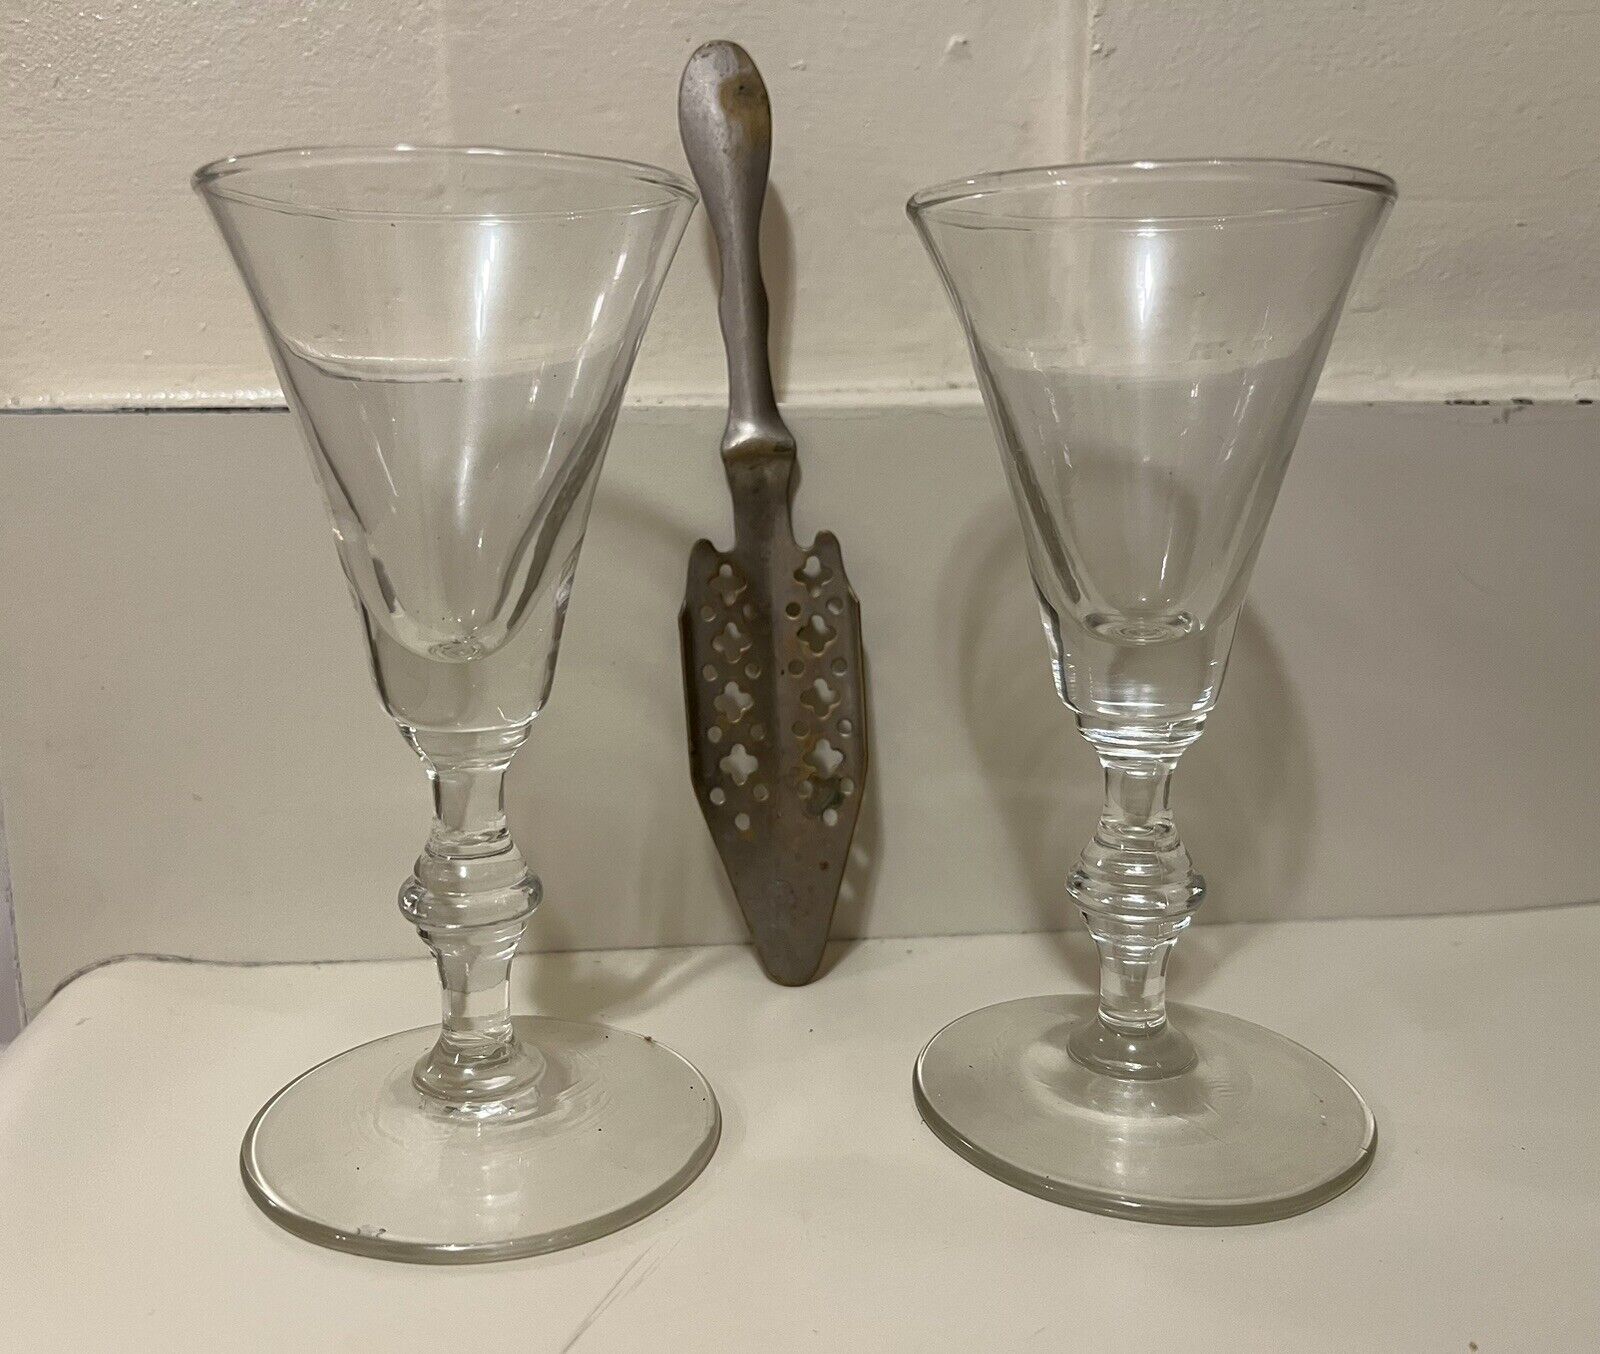 Vintage Absinthe 2 Glasses and Spoon set Silver Glass 1970s French Cross